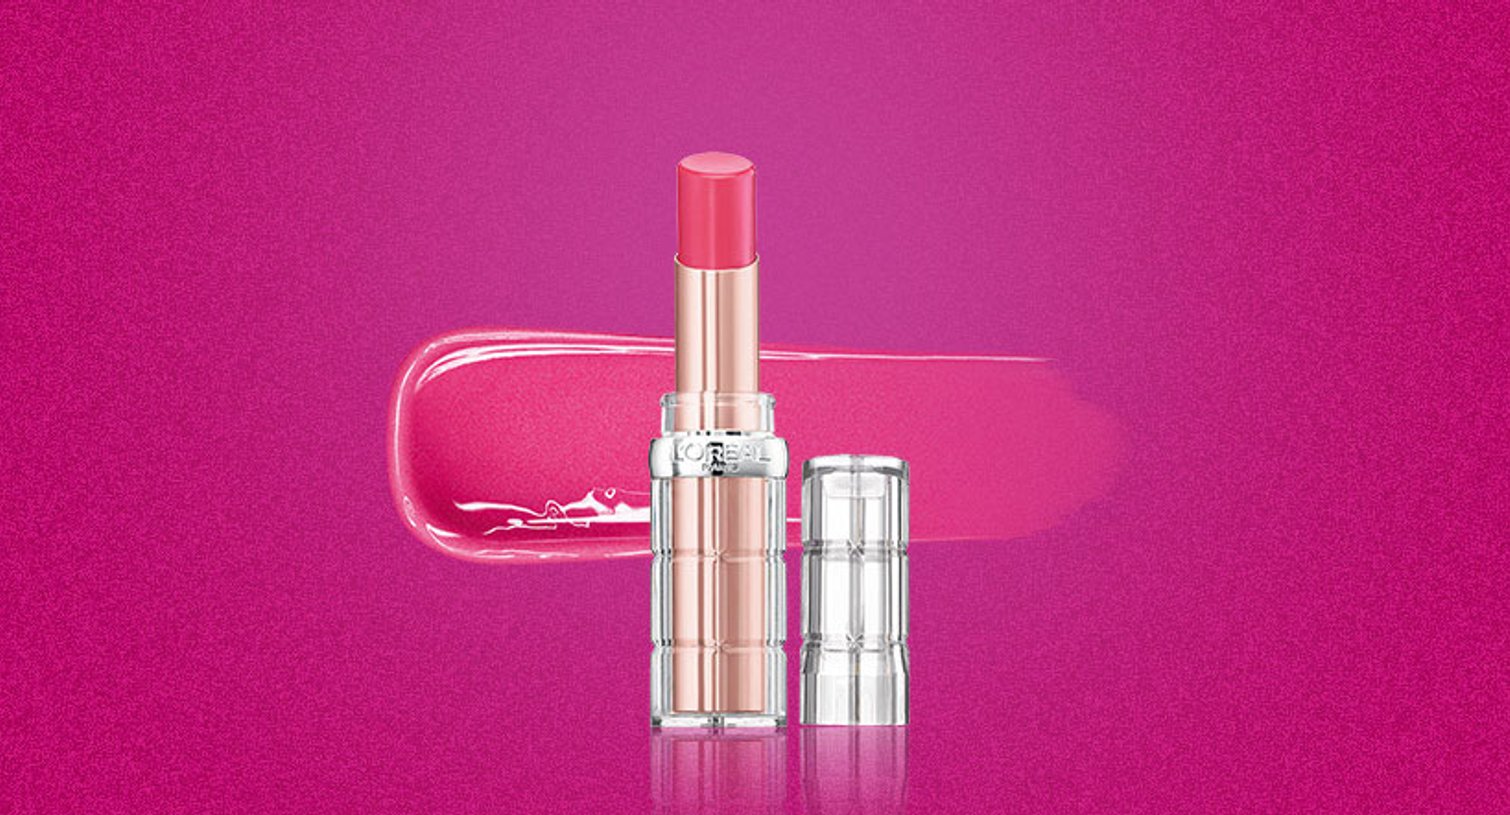 Loreal Paris BMAG Slideshow Our 20 Best Pink Lipsticks for Every Skin Tone Slide13